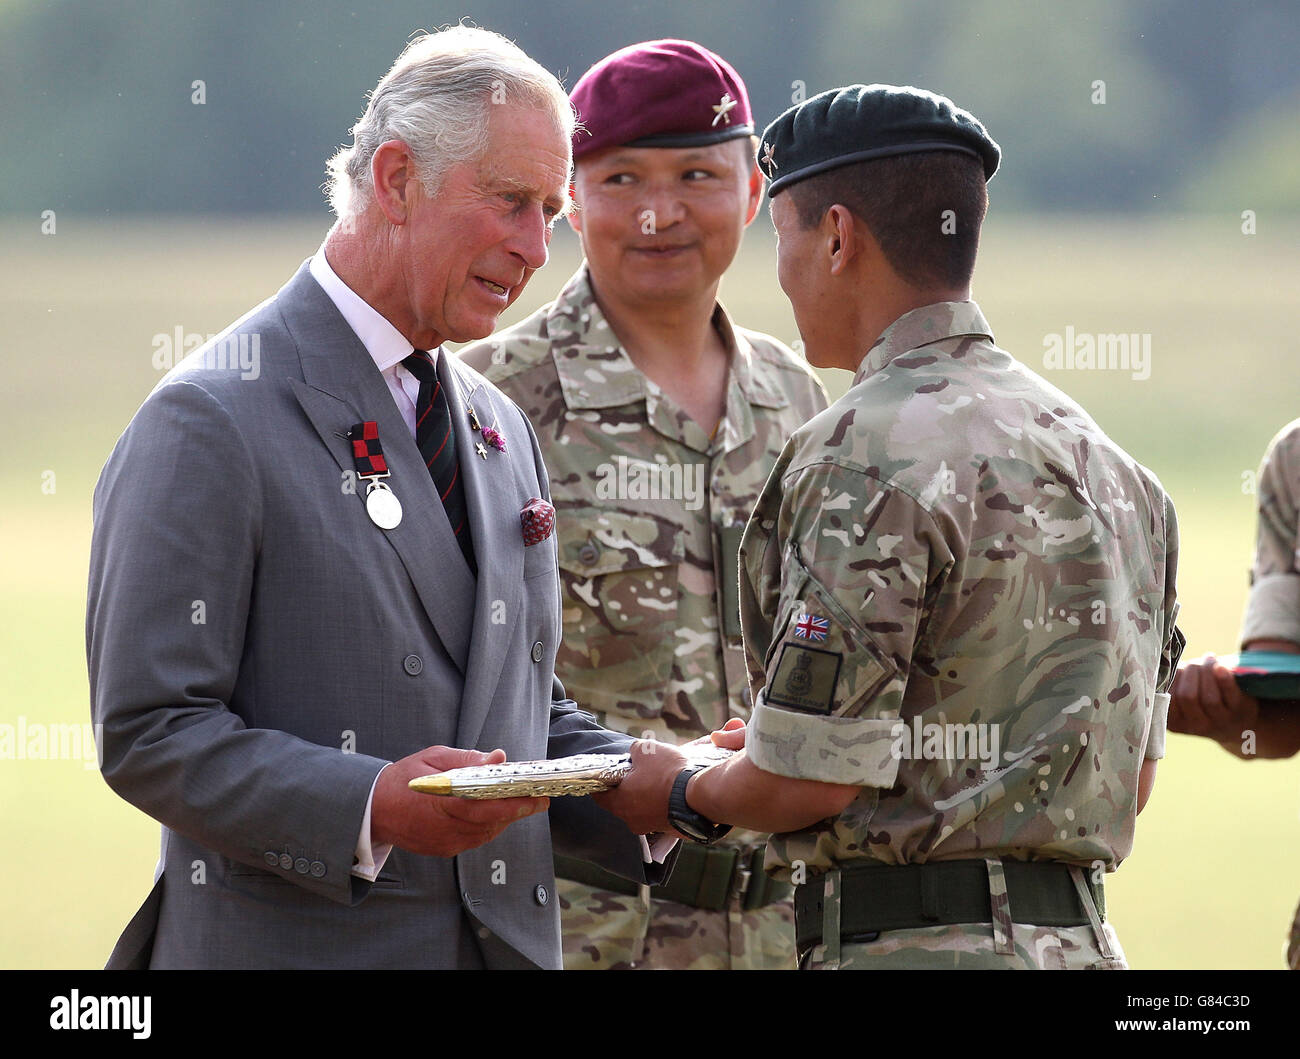 The Prince of Wales, Colonel in Chief of The Royal Gurkha Rifles, examines a traditional kukri knife during a visit to 2nd Battalion The Royal Gurkha Rifles at Shorncliffe barracks in Folkestone, Kent, to celebrate 200 years of Gurkha service to the Crown on July 1. Stock Photo